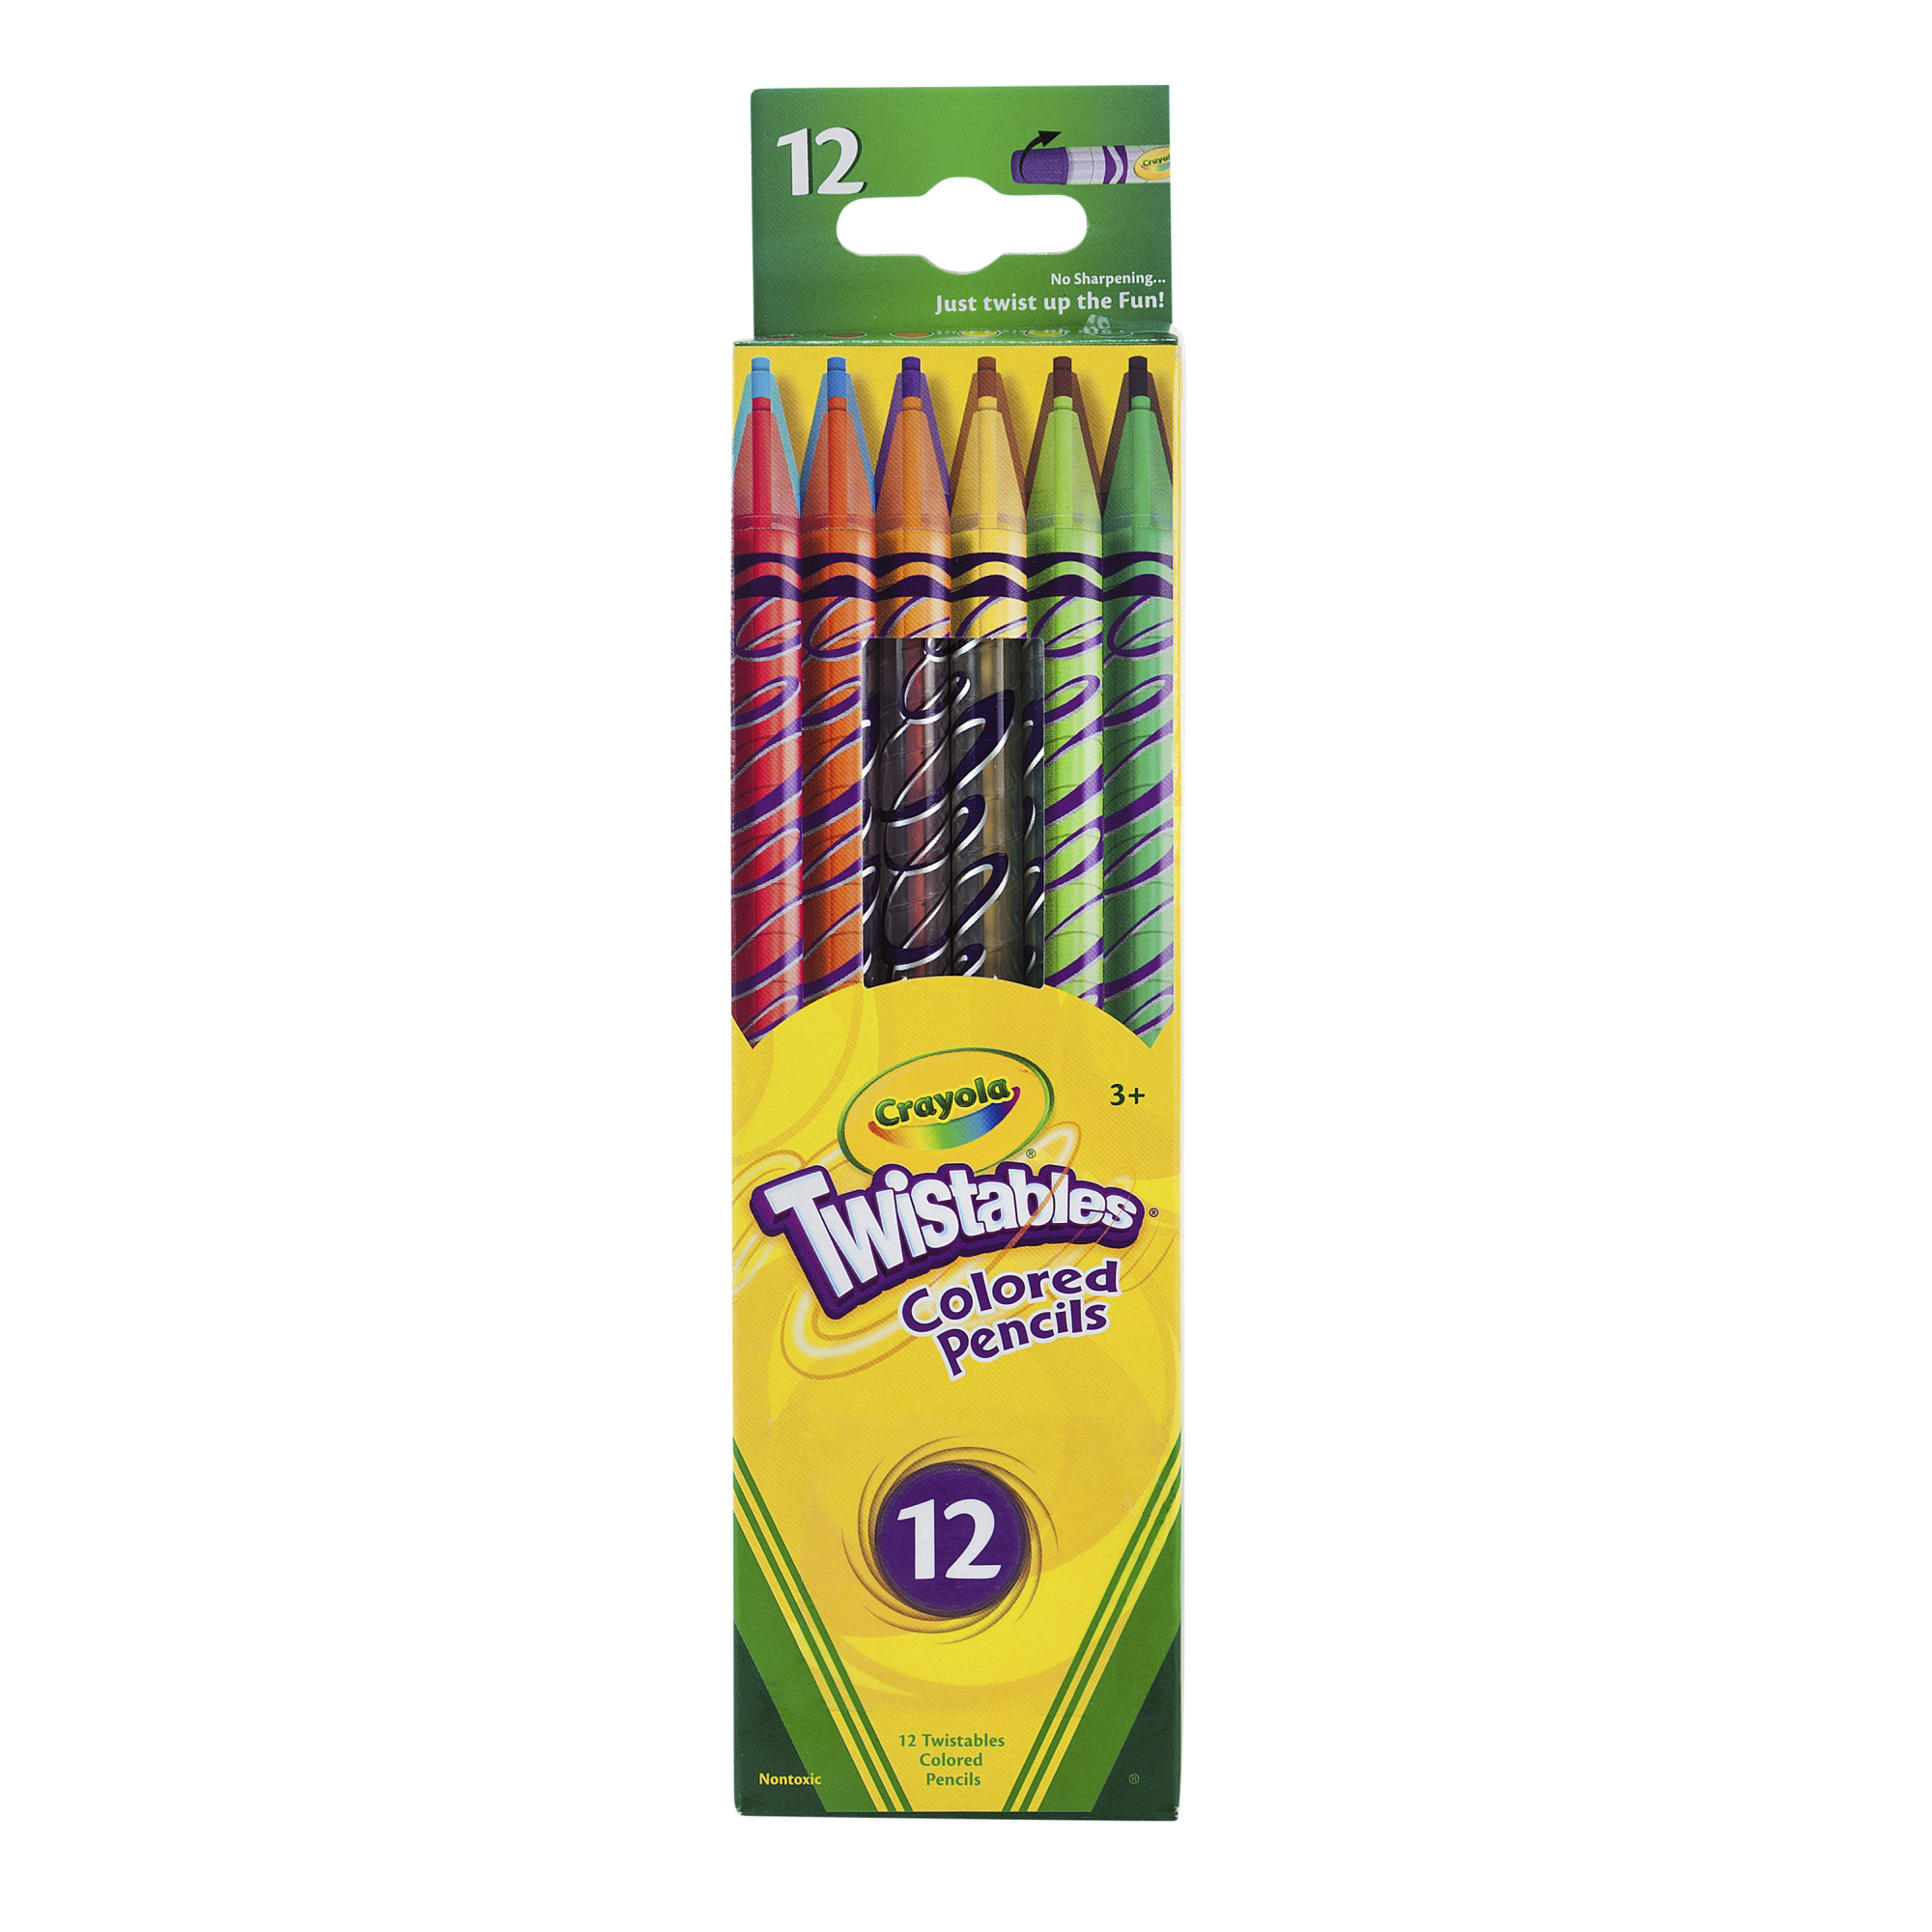 Crayola Twistables Colored Pencils, Assorted Colors, Set of 12, School Supplies for Beginner Child - image 1 of 5